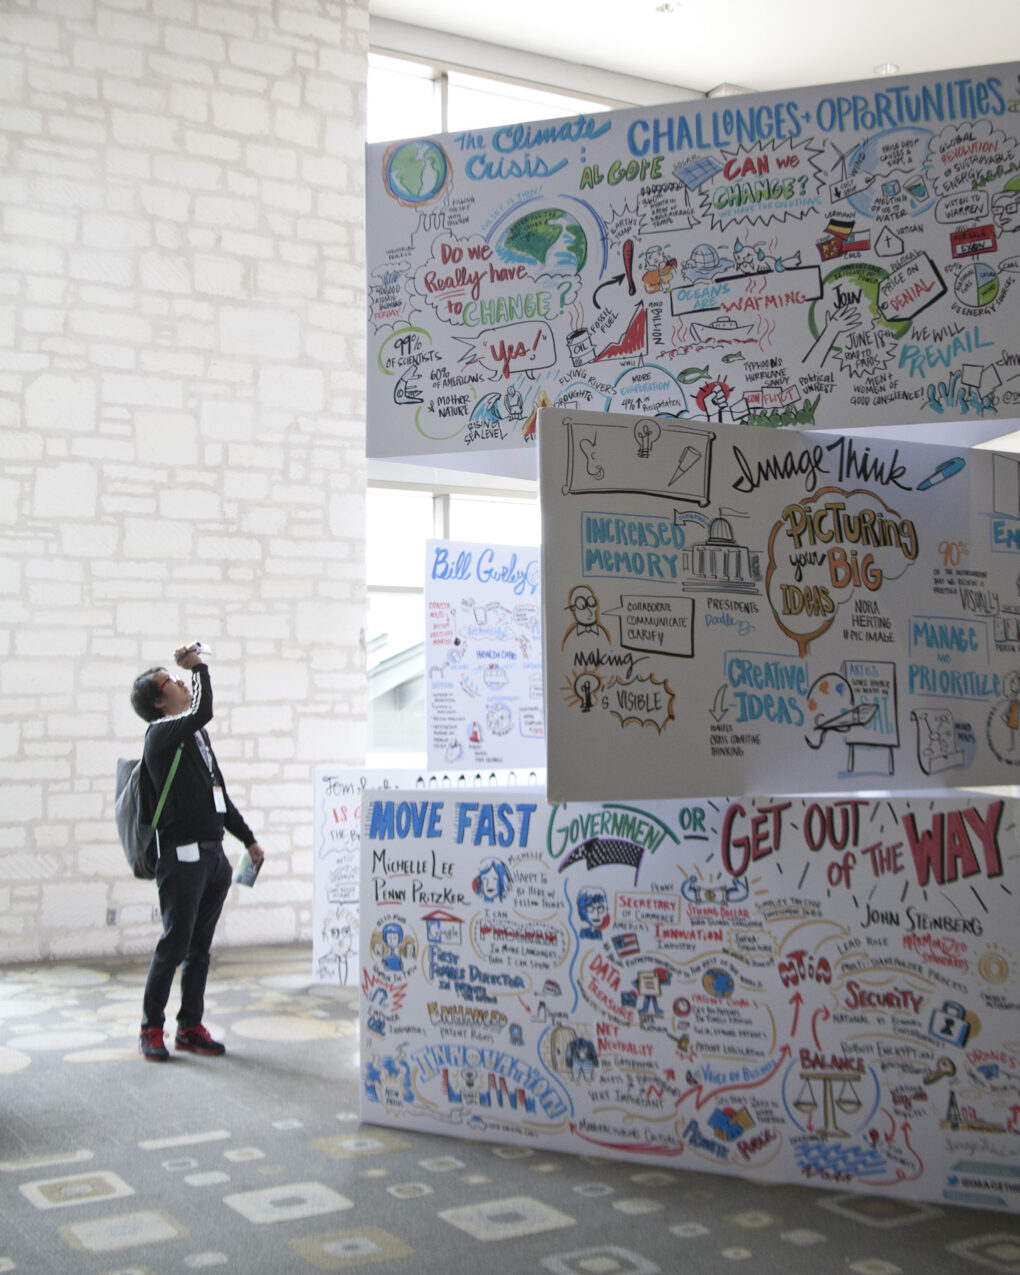 ImageThink creates a social listening mural tower to engage conference attendees.